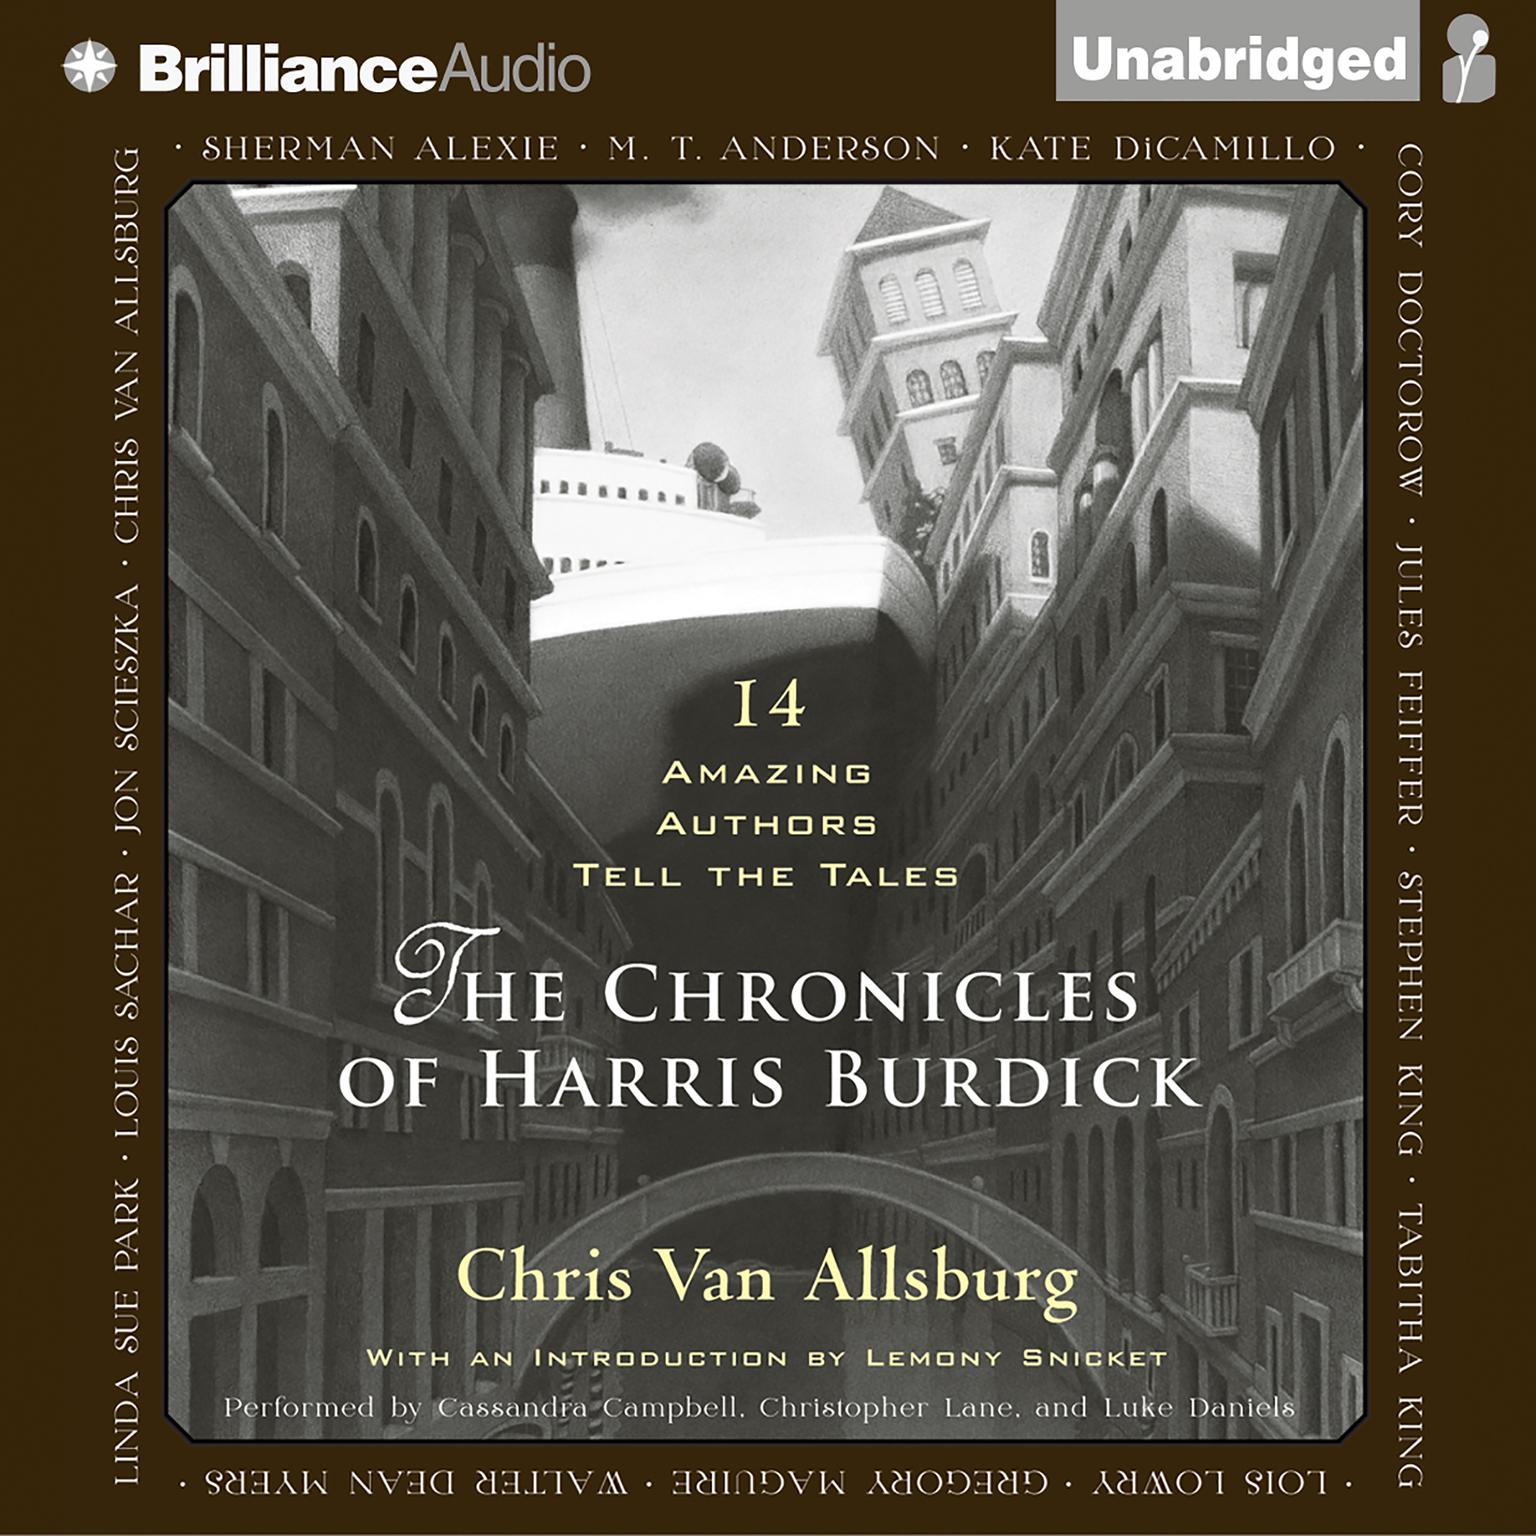 The Chronicles of Harris Burdick: Fourteen Amazing Authors Tell the Tales / With an Introduction by Lemony Snicket Audiobook, by Chris Van Allsburg